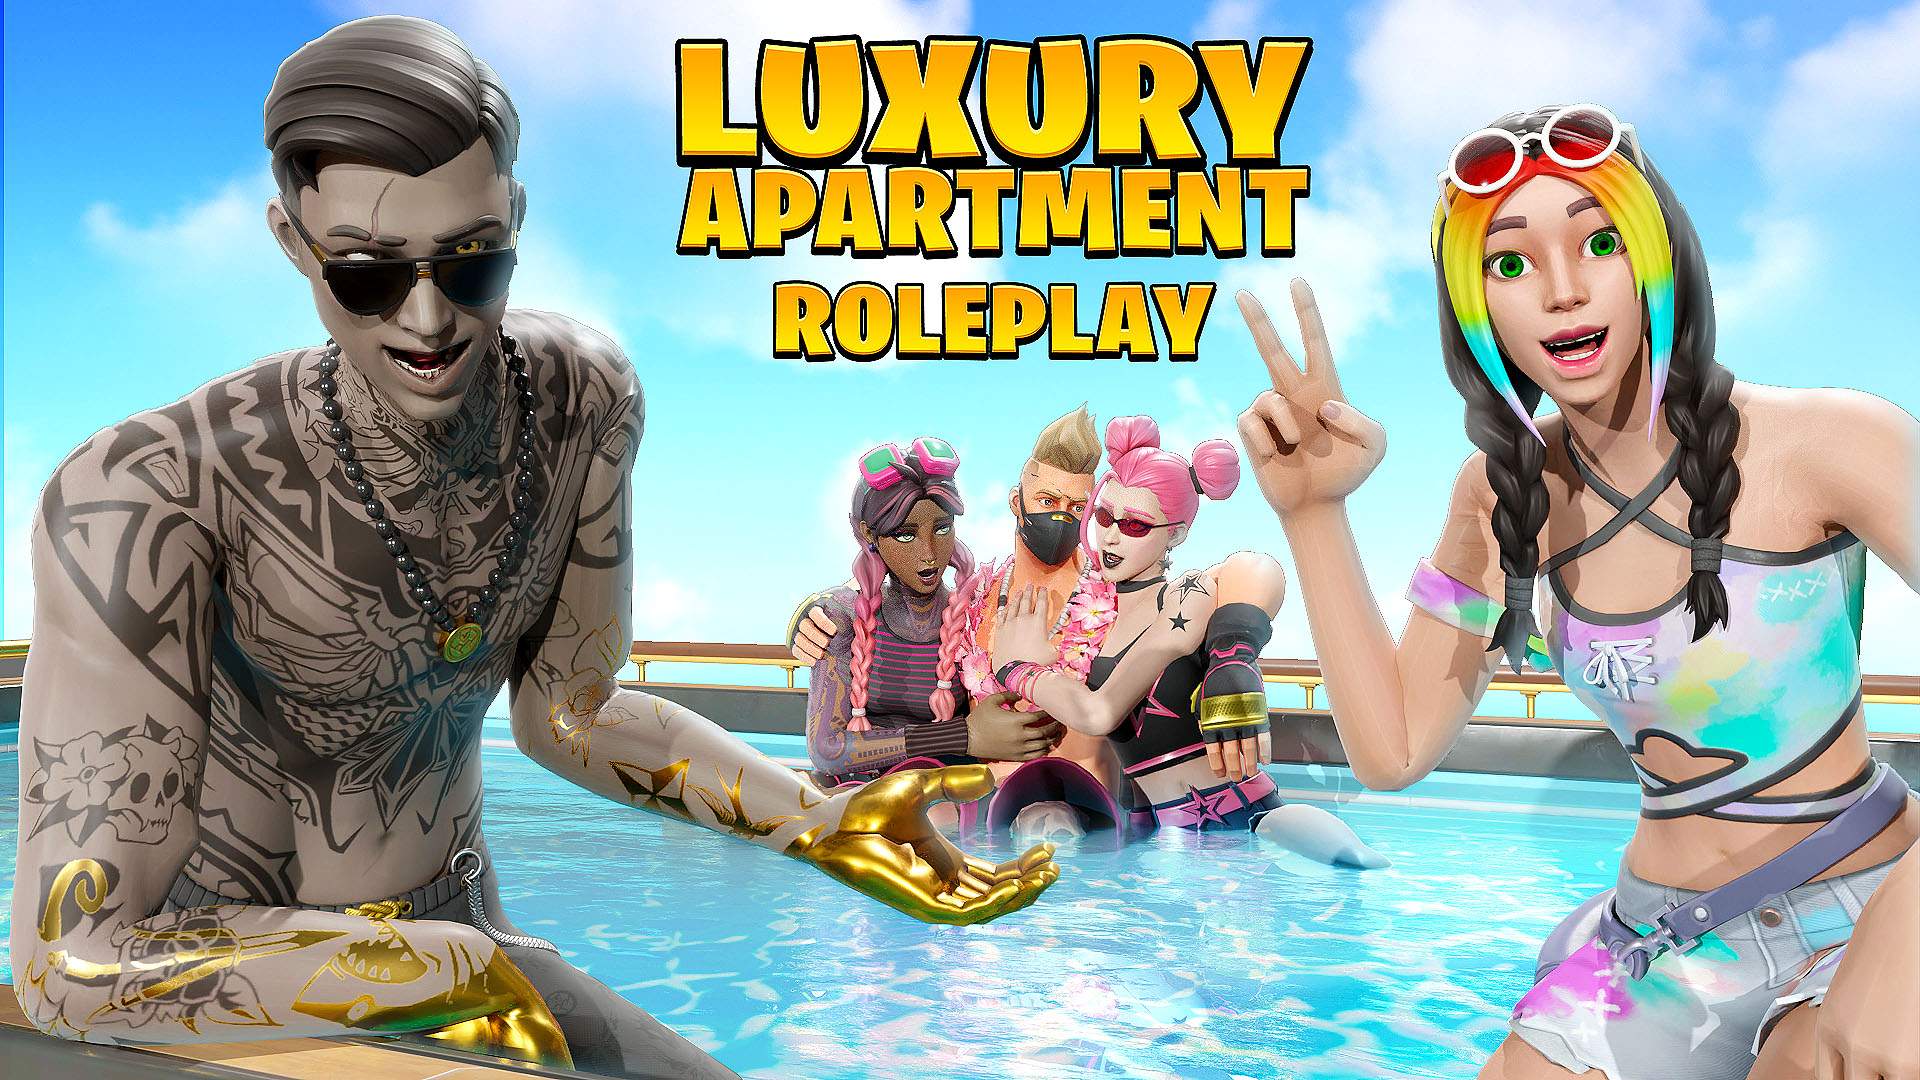 Luxury Apartment Roleplay